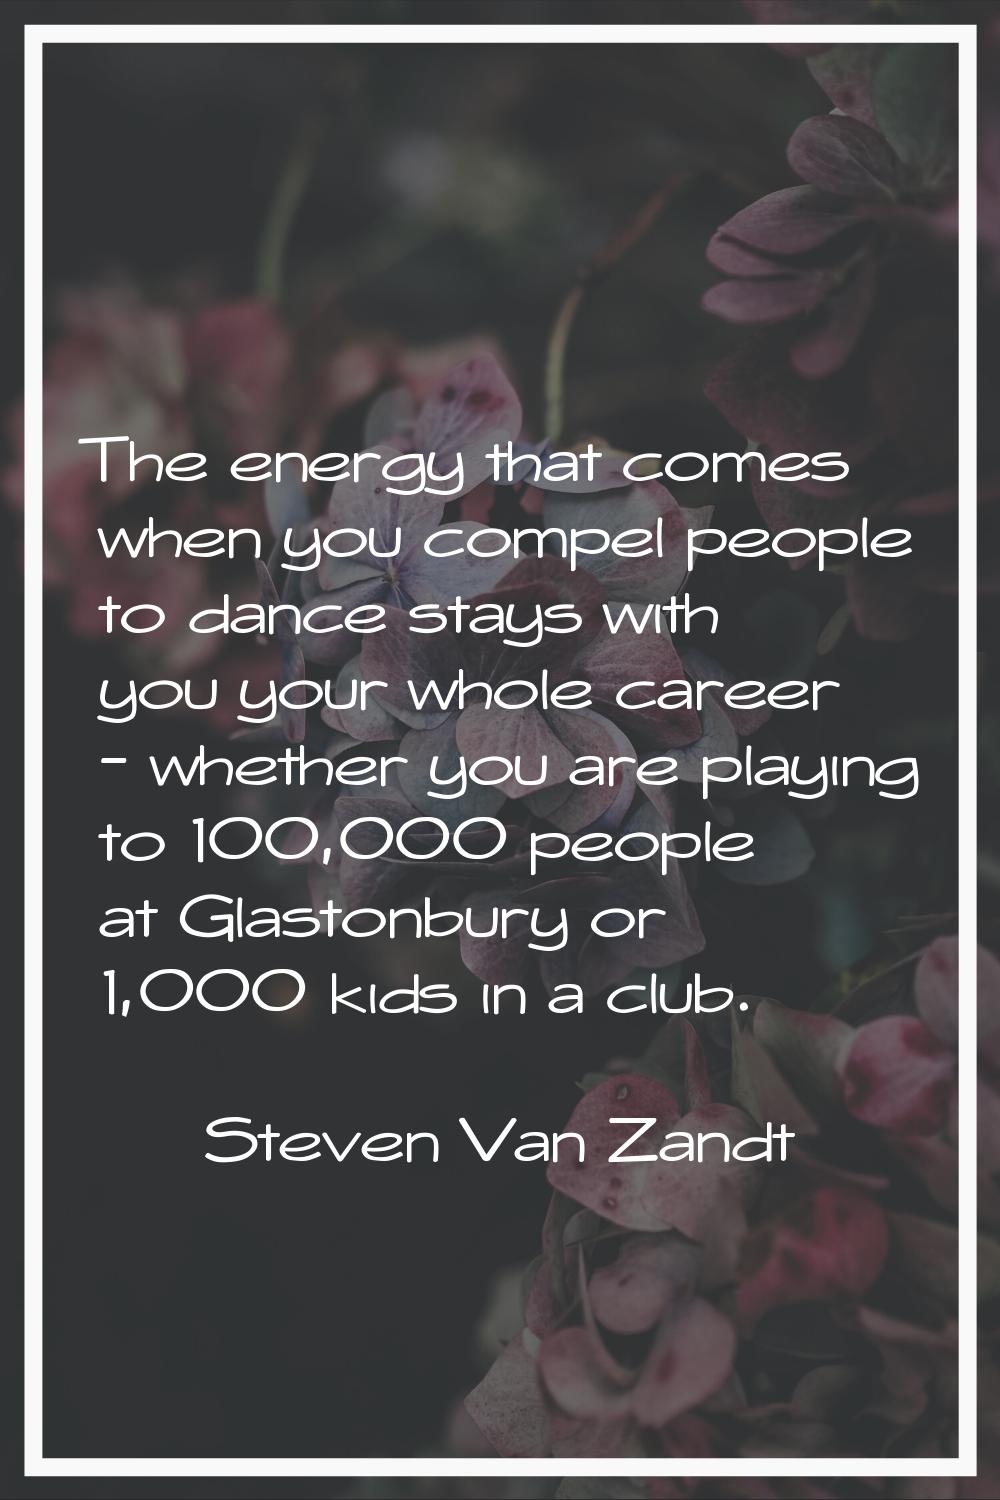 The energy that comes when you compel people to dance stays with you your whole career - whether yo